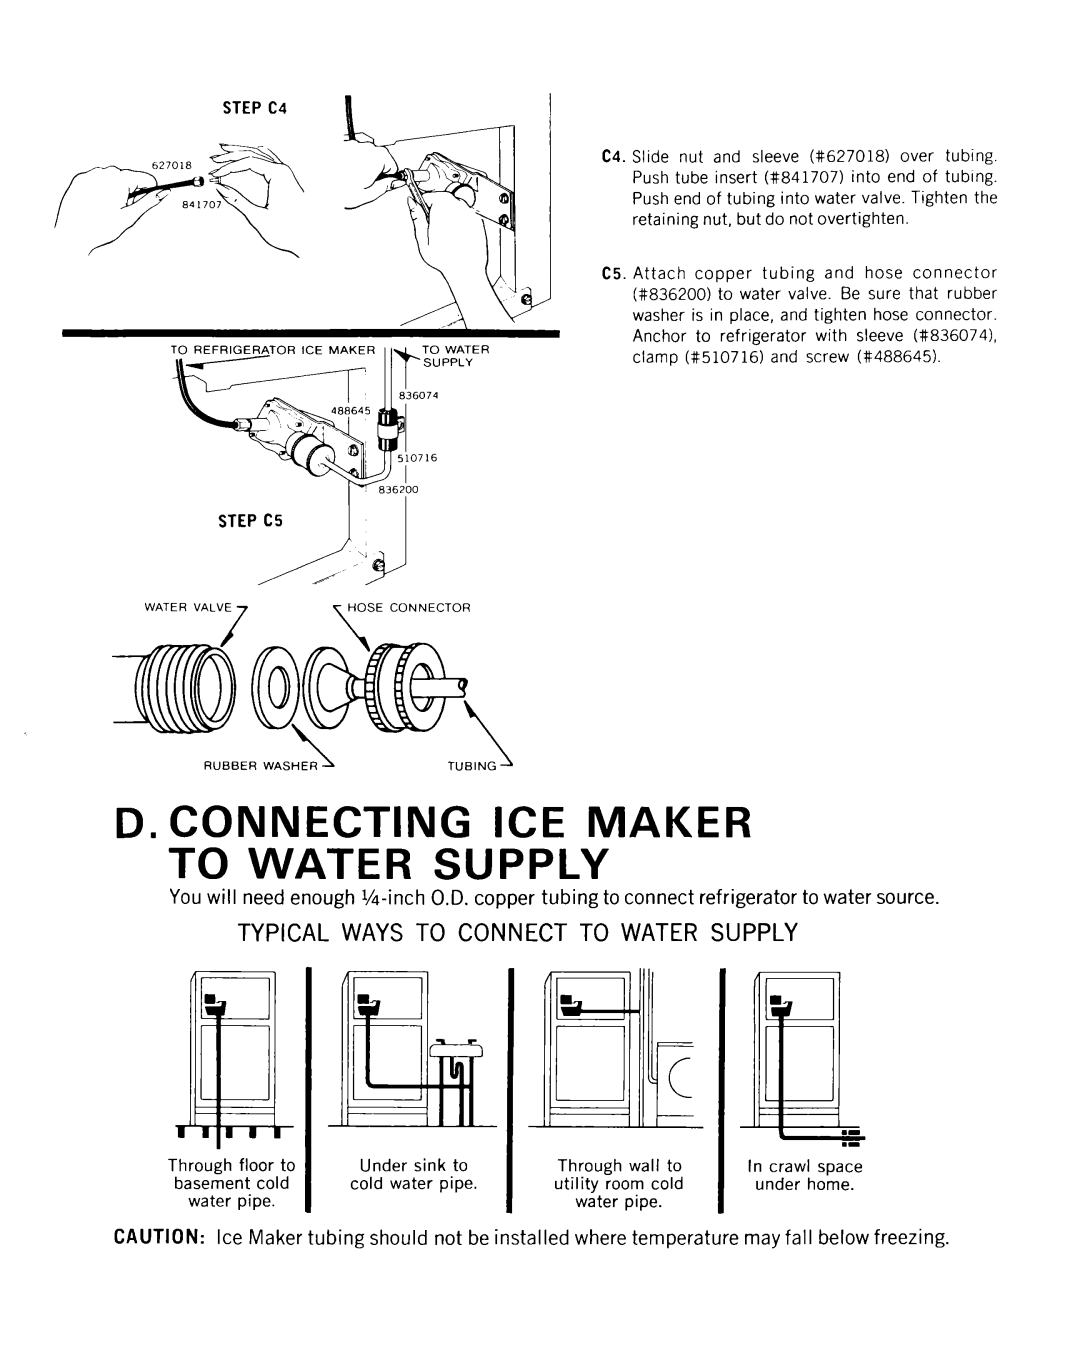 Whirlpool ECKMF-6 manual D. Connecting Ice Maker, Typical Ways To Connect To Water Supply 